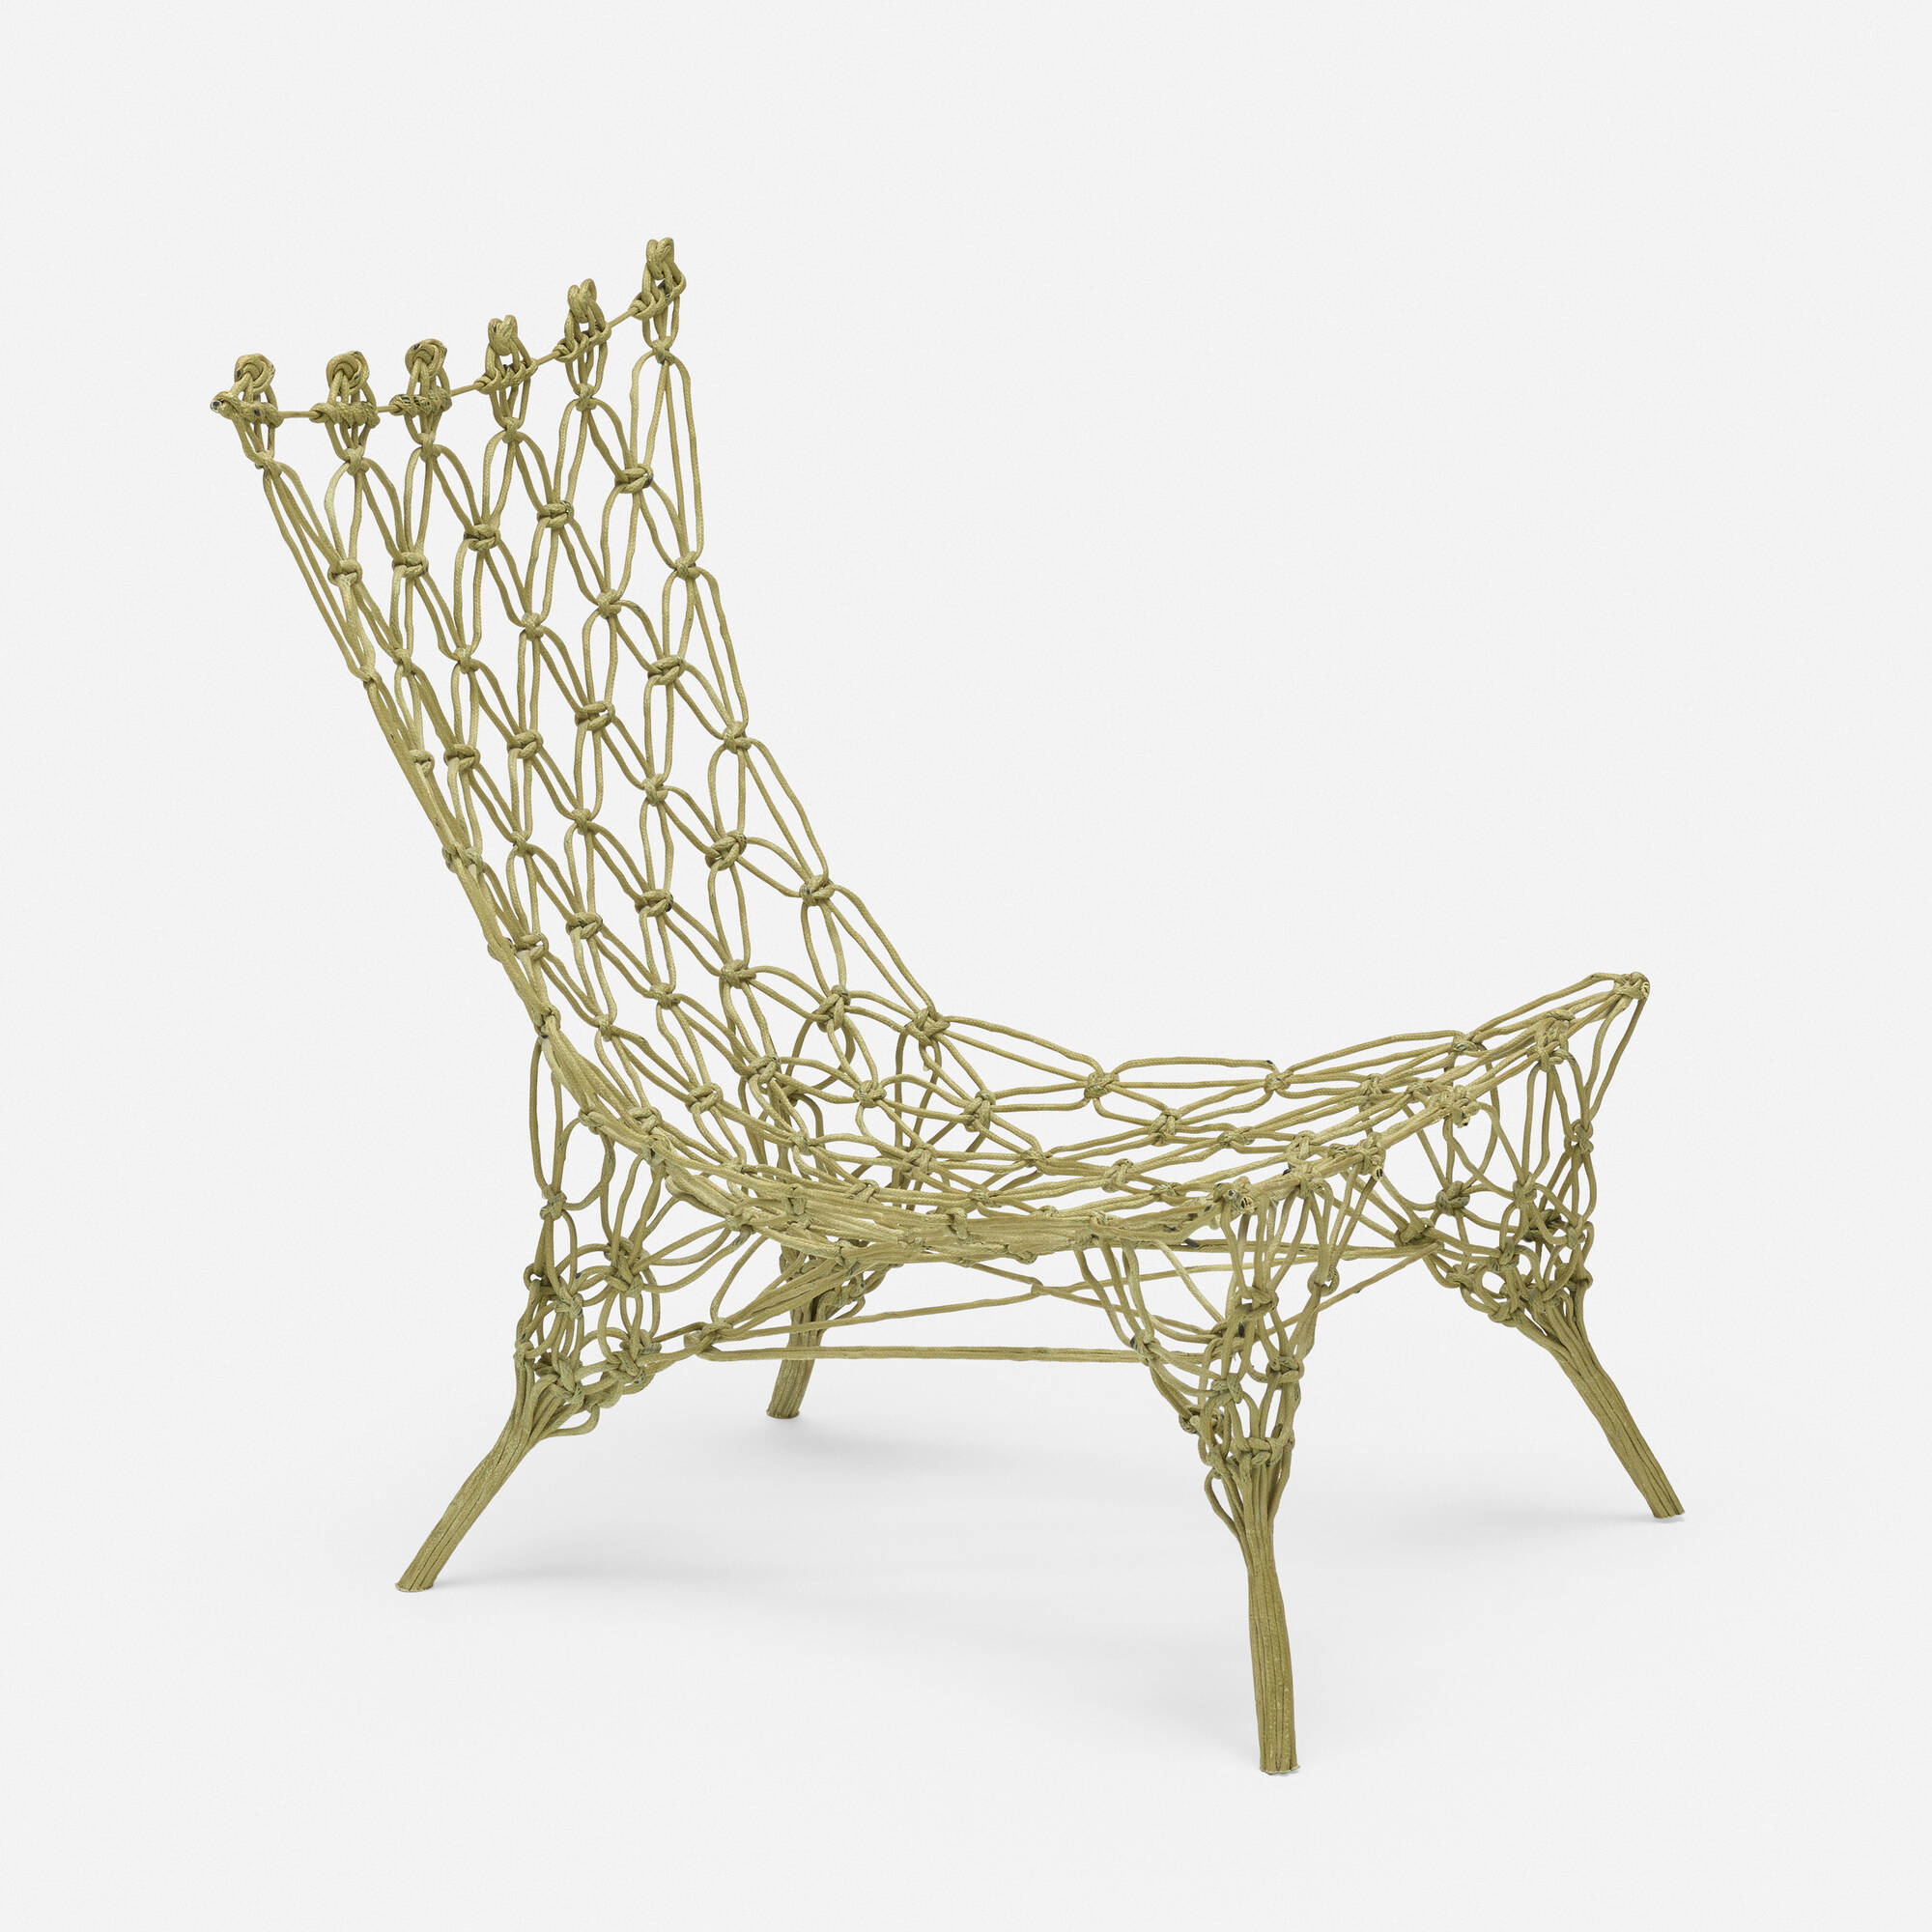 MARCEL WANDERS, KNOTTED CHAIR